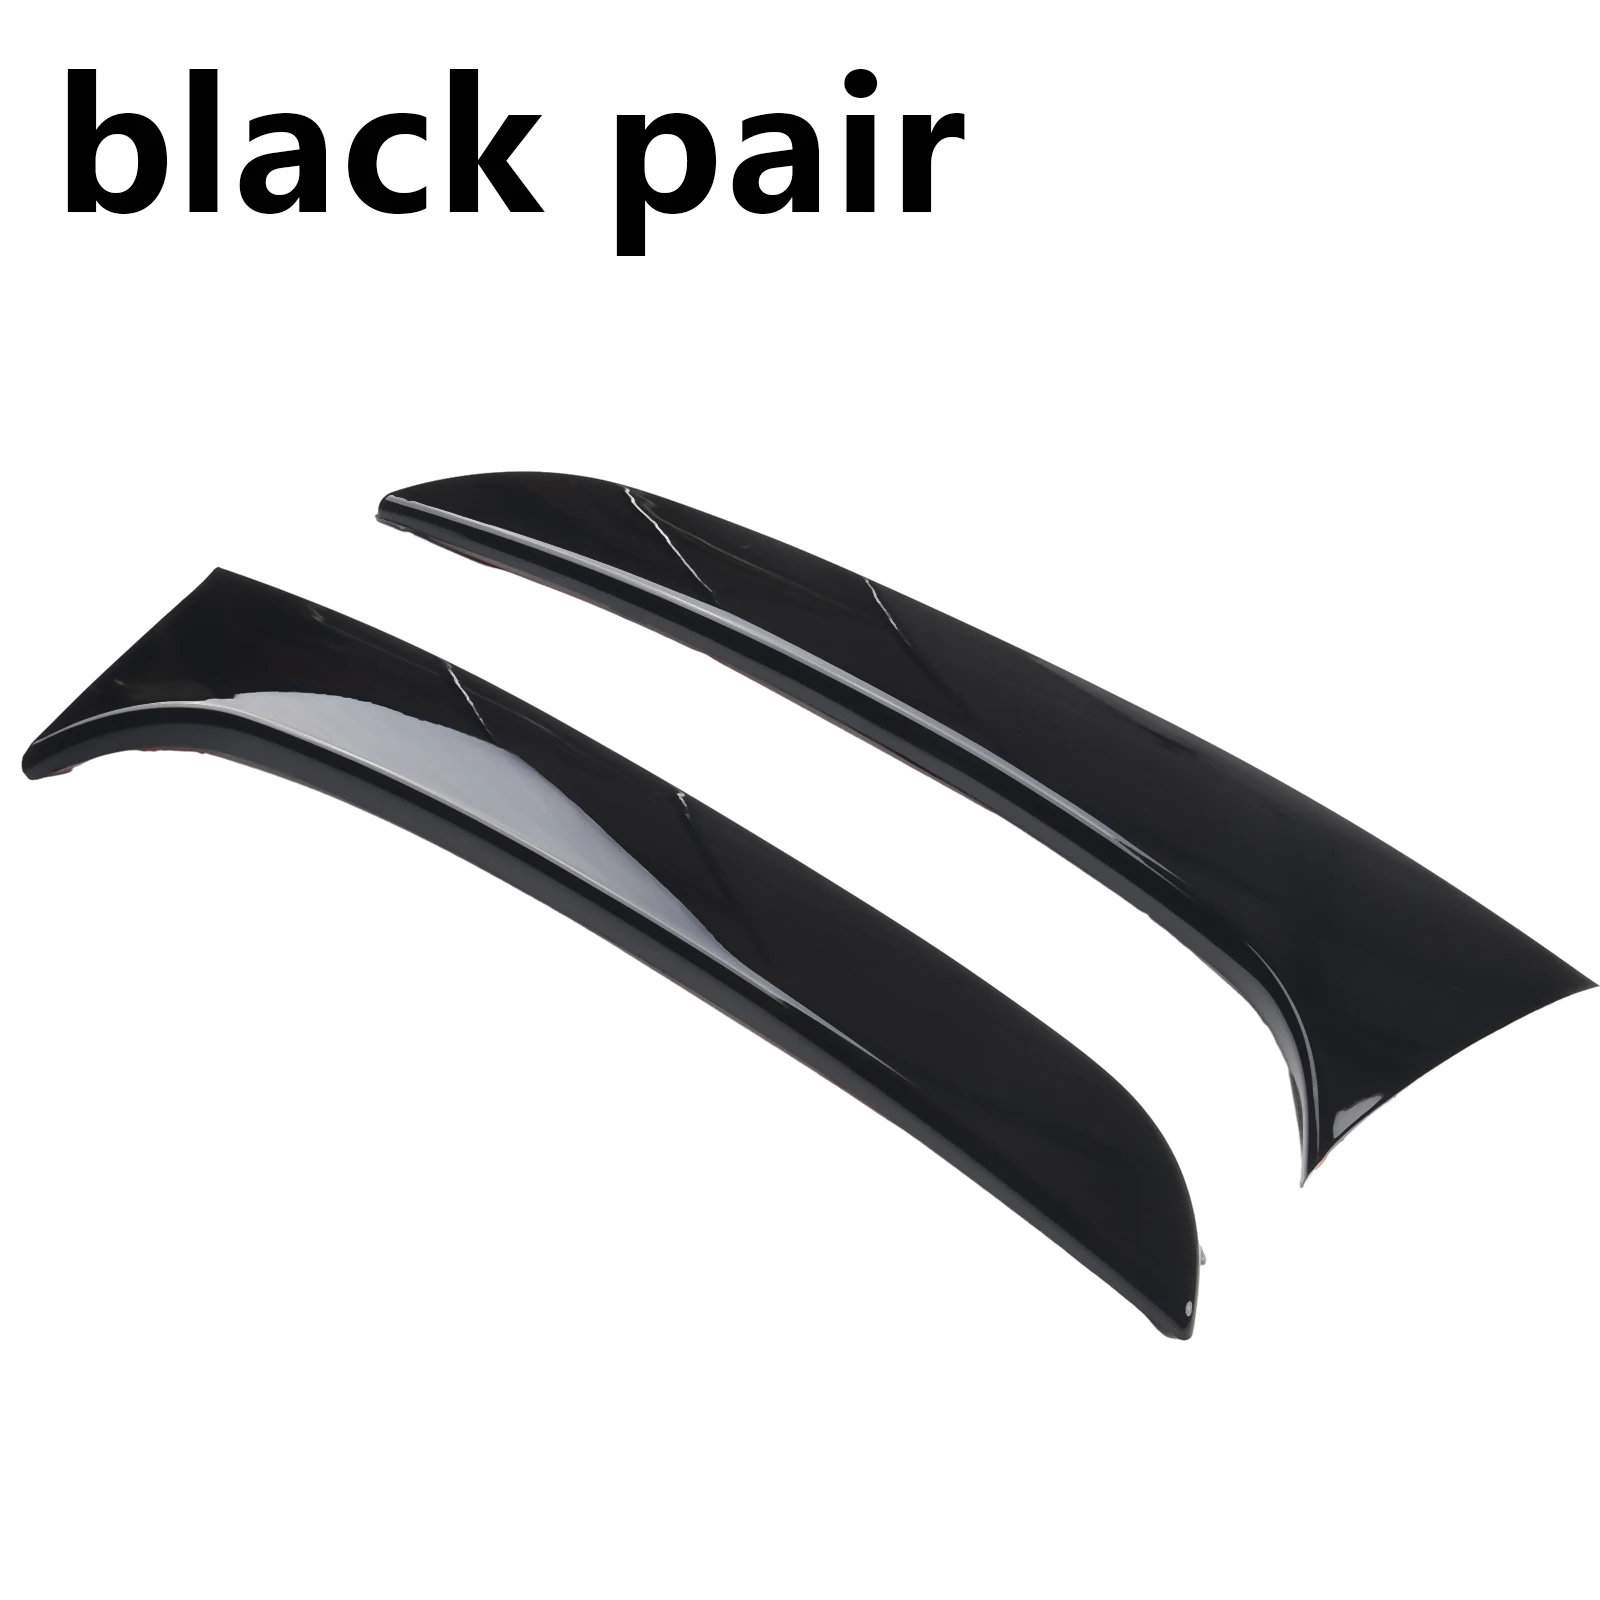 

Add a Touch of Elegance Easy to Install Rear Spoiler for BMW 1 Series F20 F21 Hatchback 2012 2019, Enhance the Look of Your Car